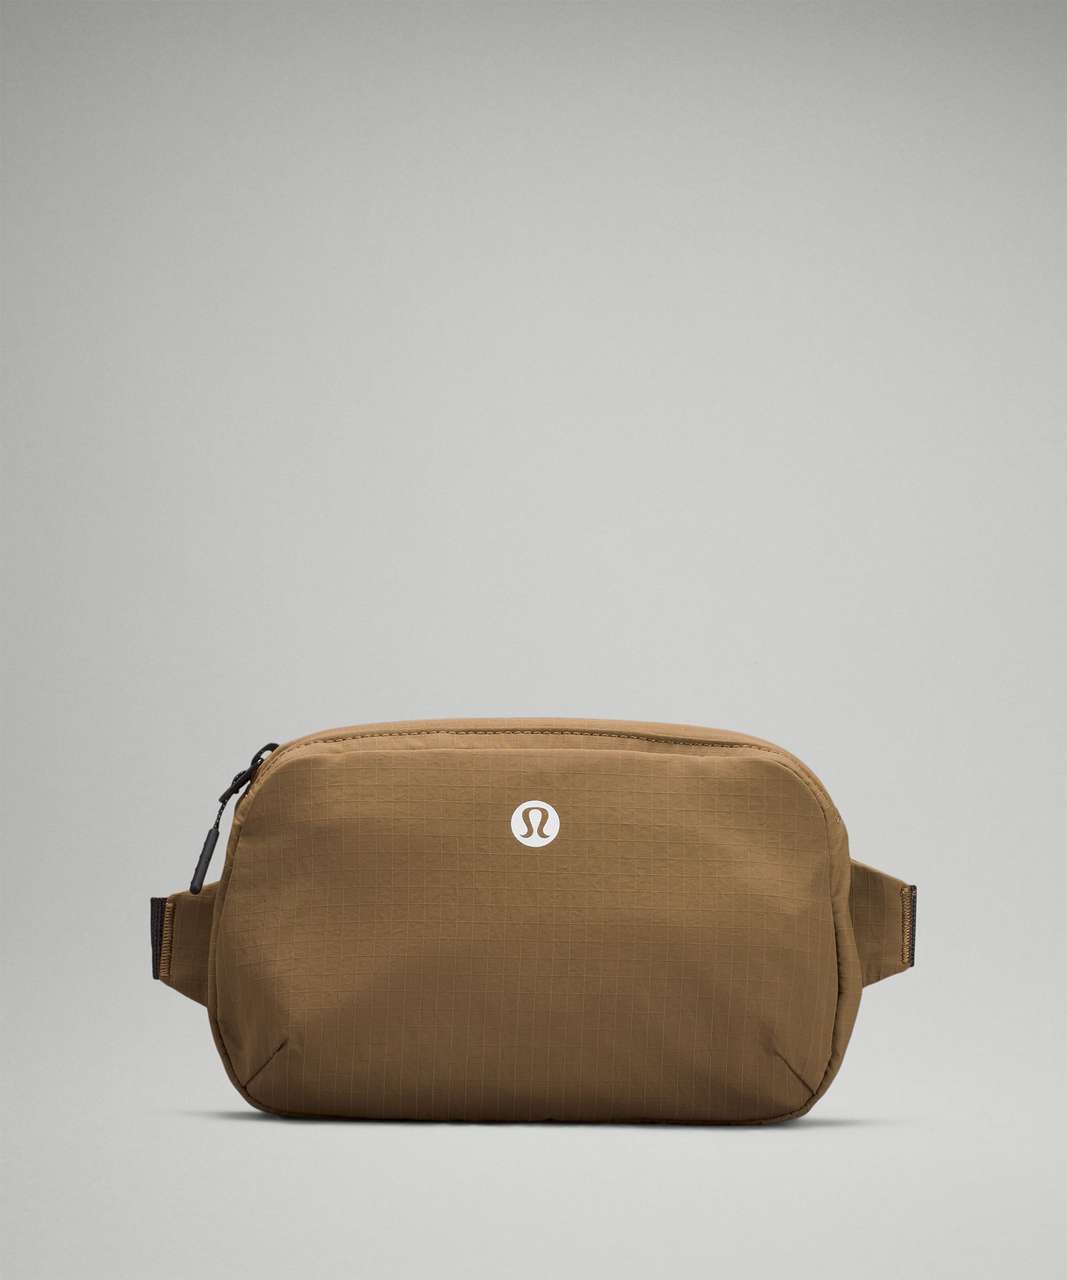 Lululemon Pack and Go Multi Wear Bag - Artifact / Ancient Copper / Graphite Grey